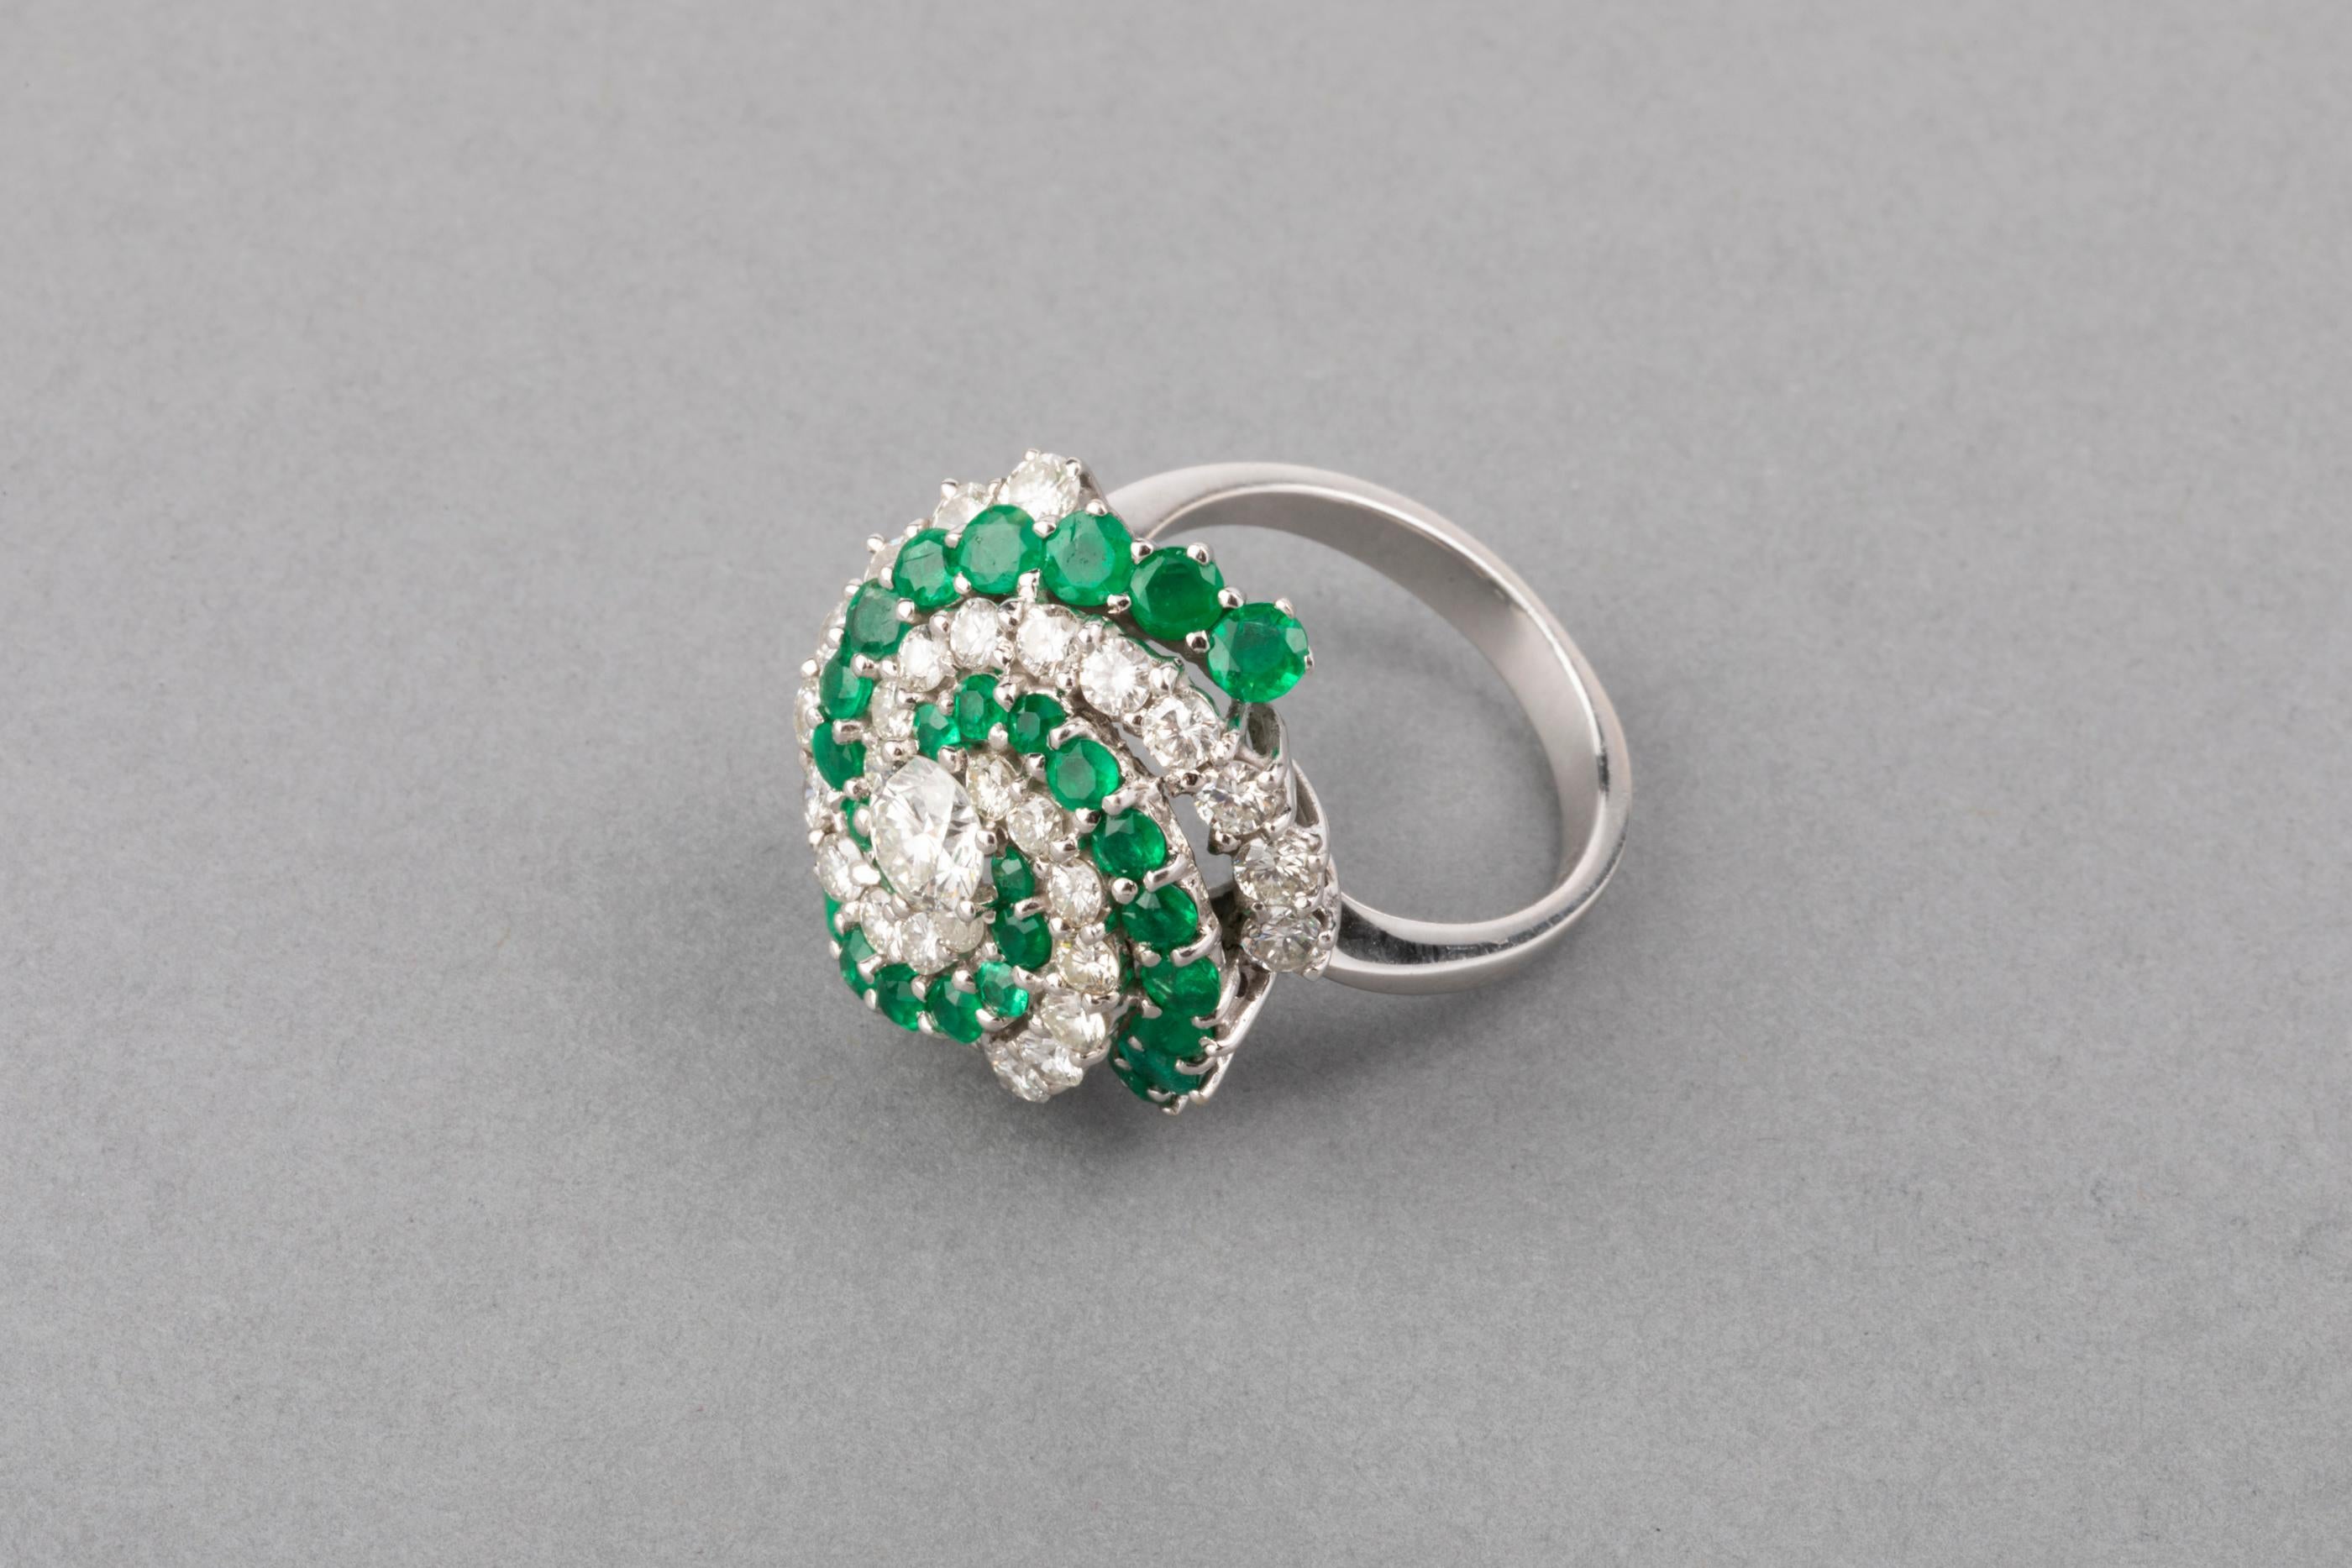 5 Carat Diamonds and 4 Carat Emeralds Ring and Earrings Set 3